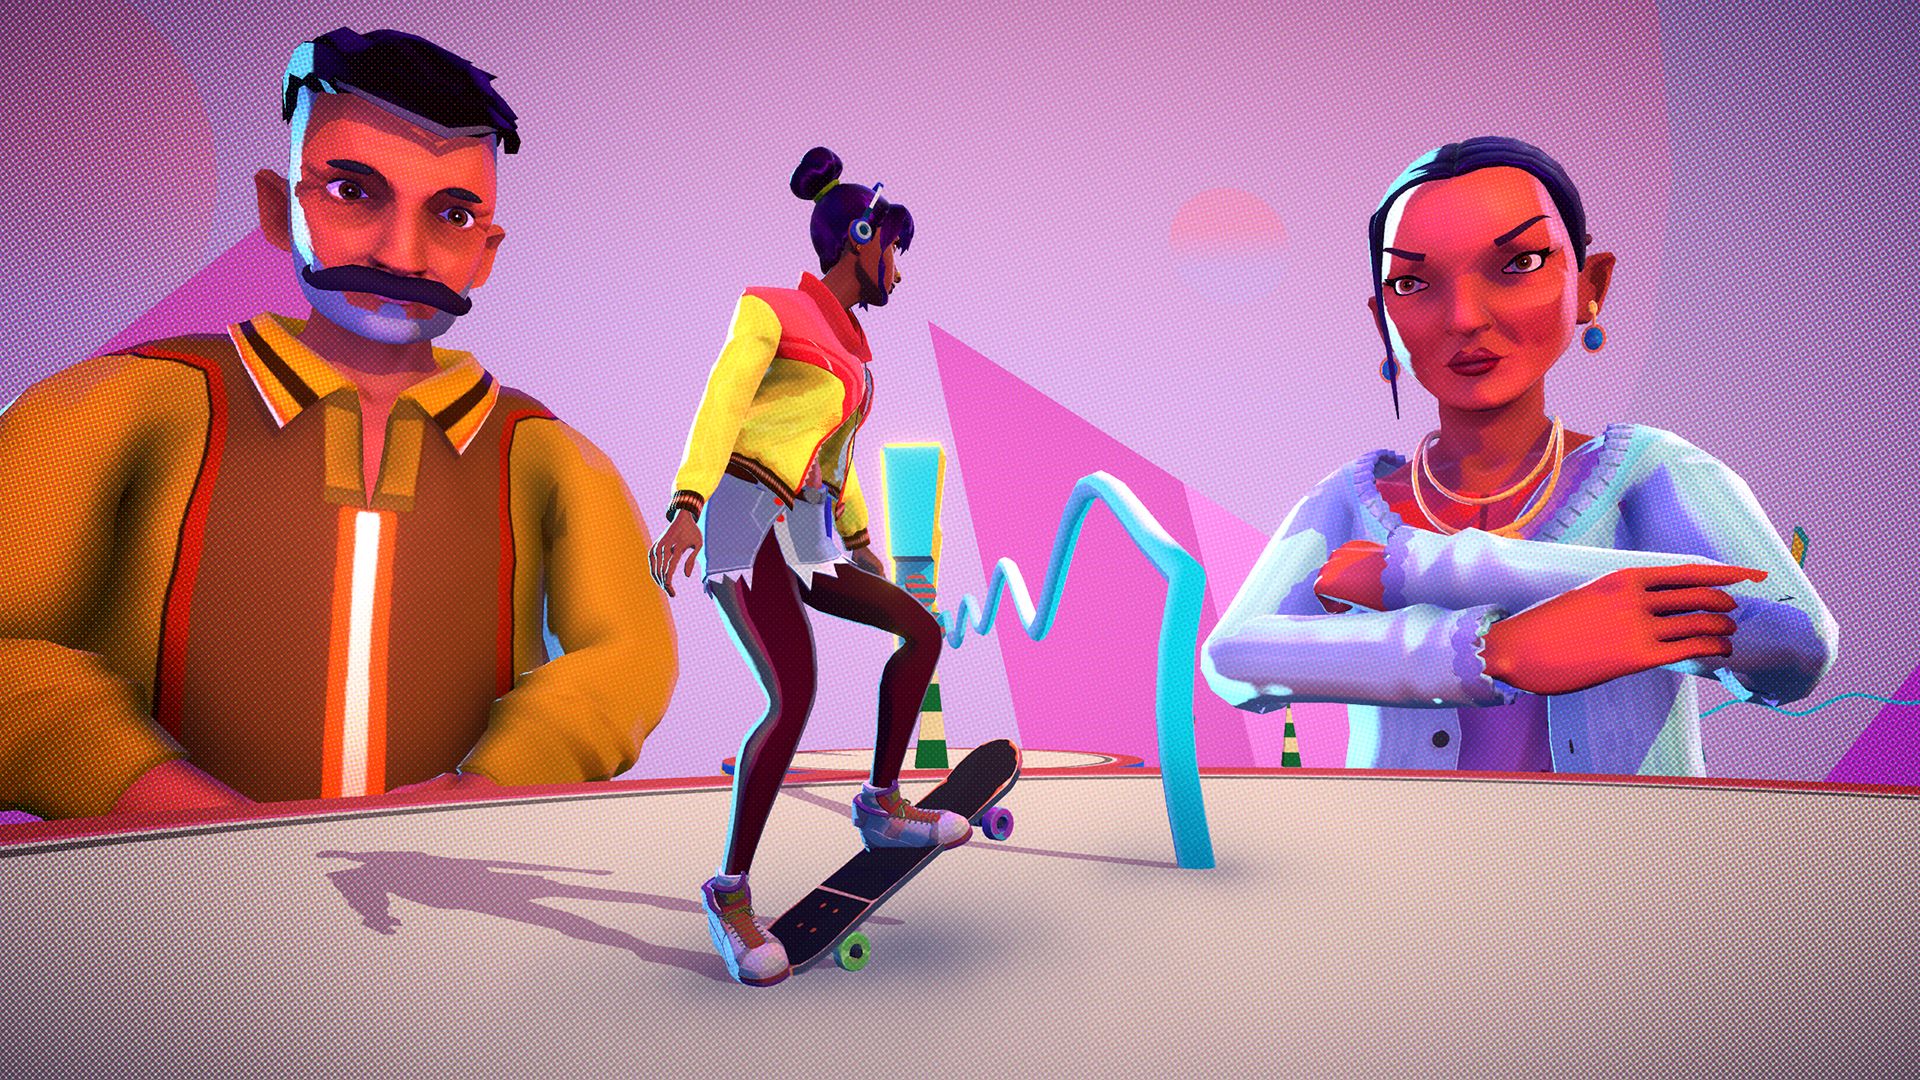 Jala standing in the center, one foot on her skateboard, facing down the two looming figures of her parents.